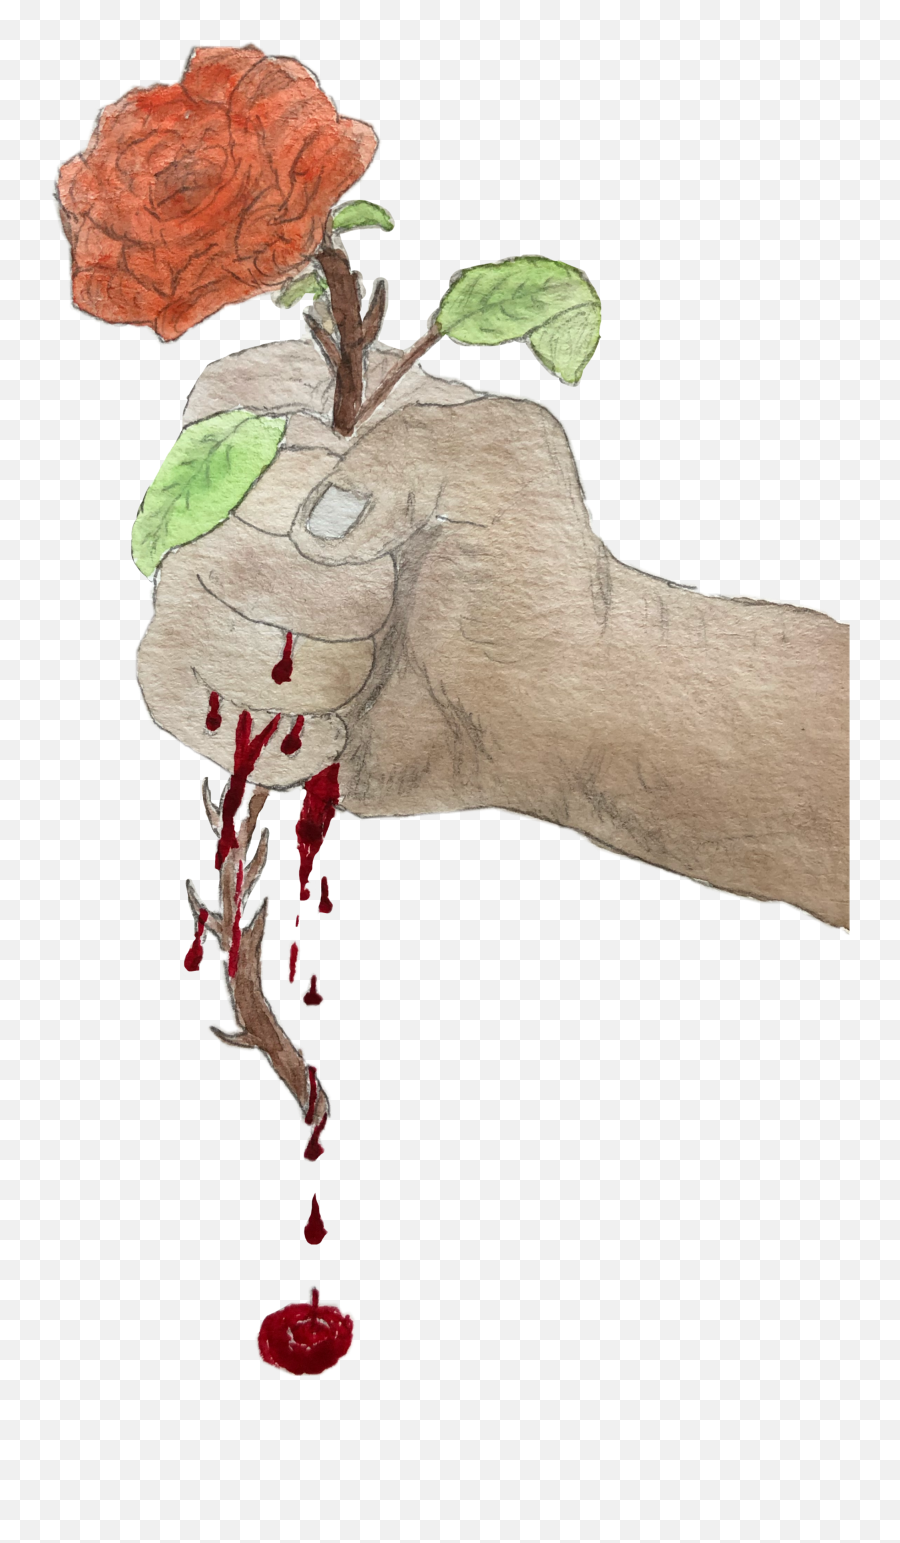 Flower Fist Nature Blood Hand Holding Sticker By Abby - Hand Holding A Rose With Blood Drawing Emoji,Blood Hand Emojis Png